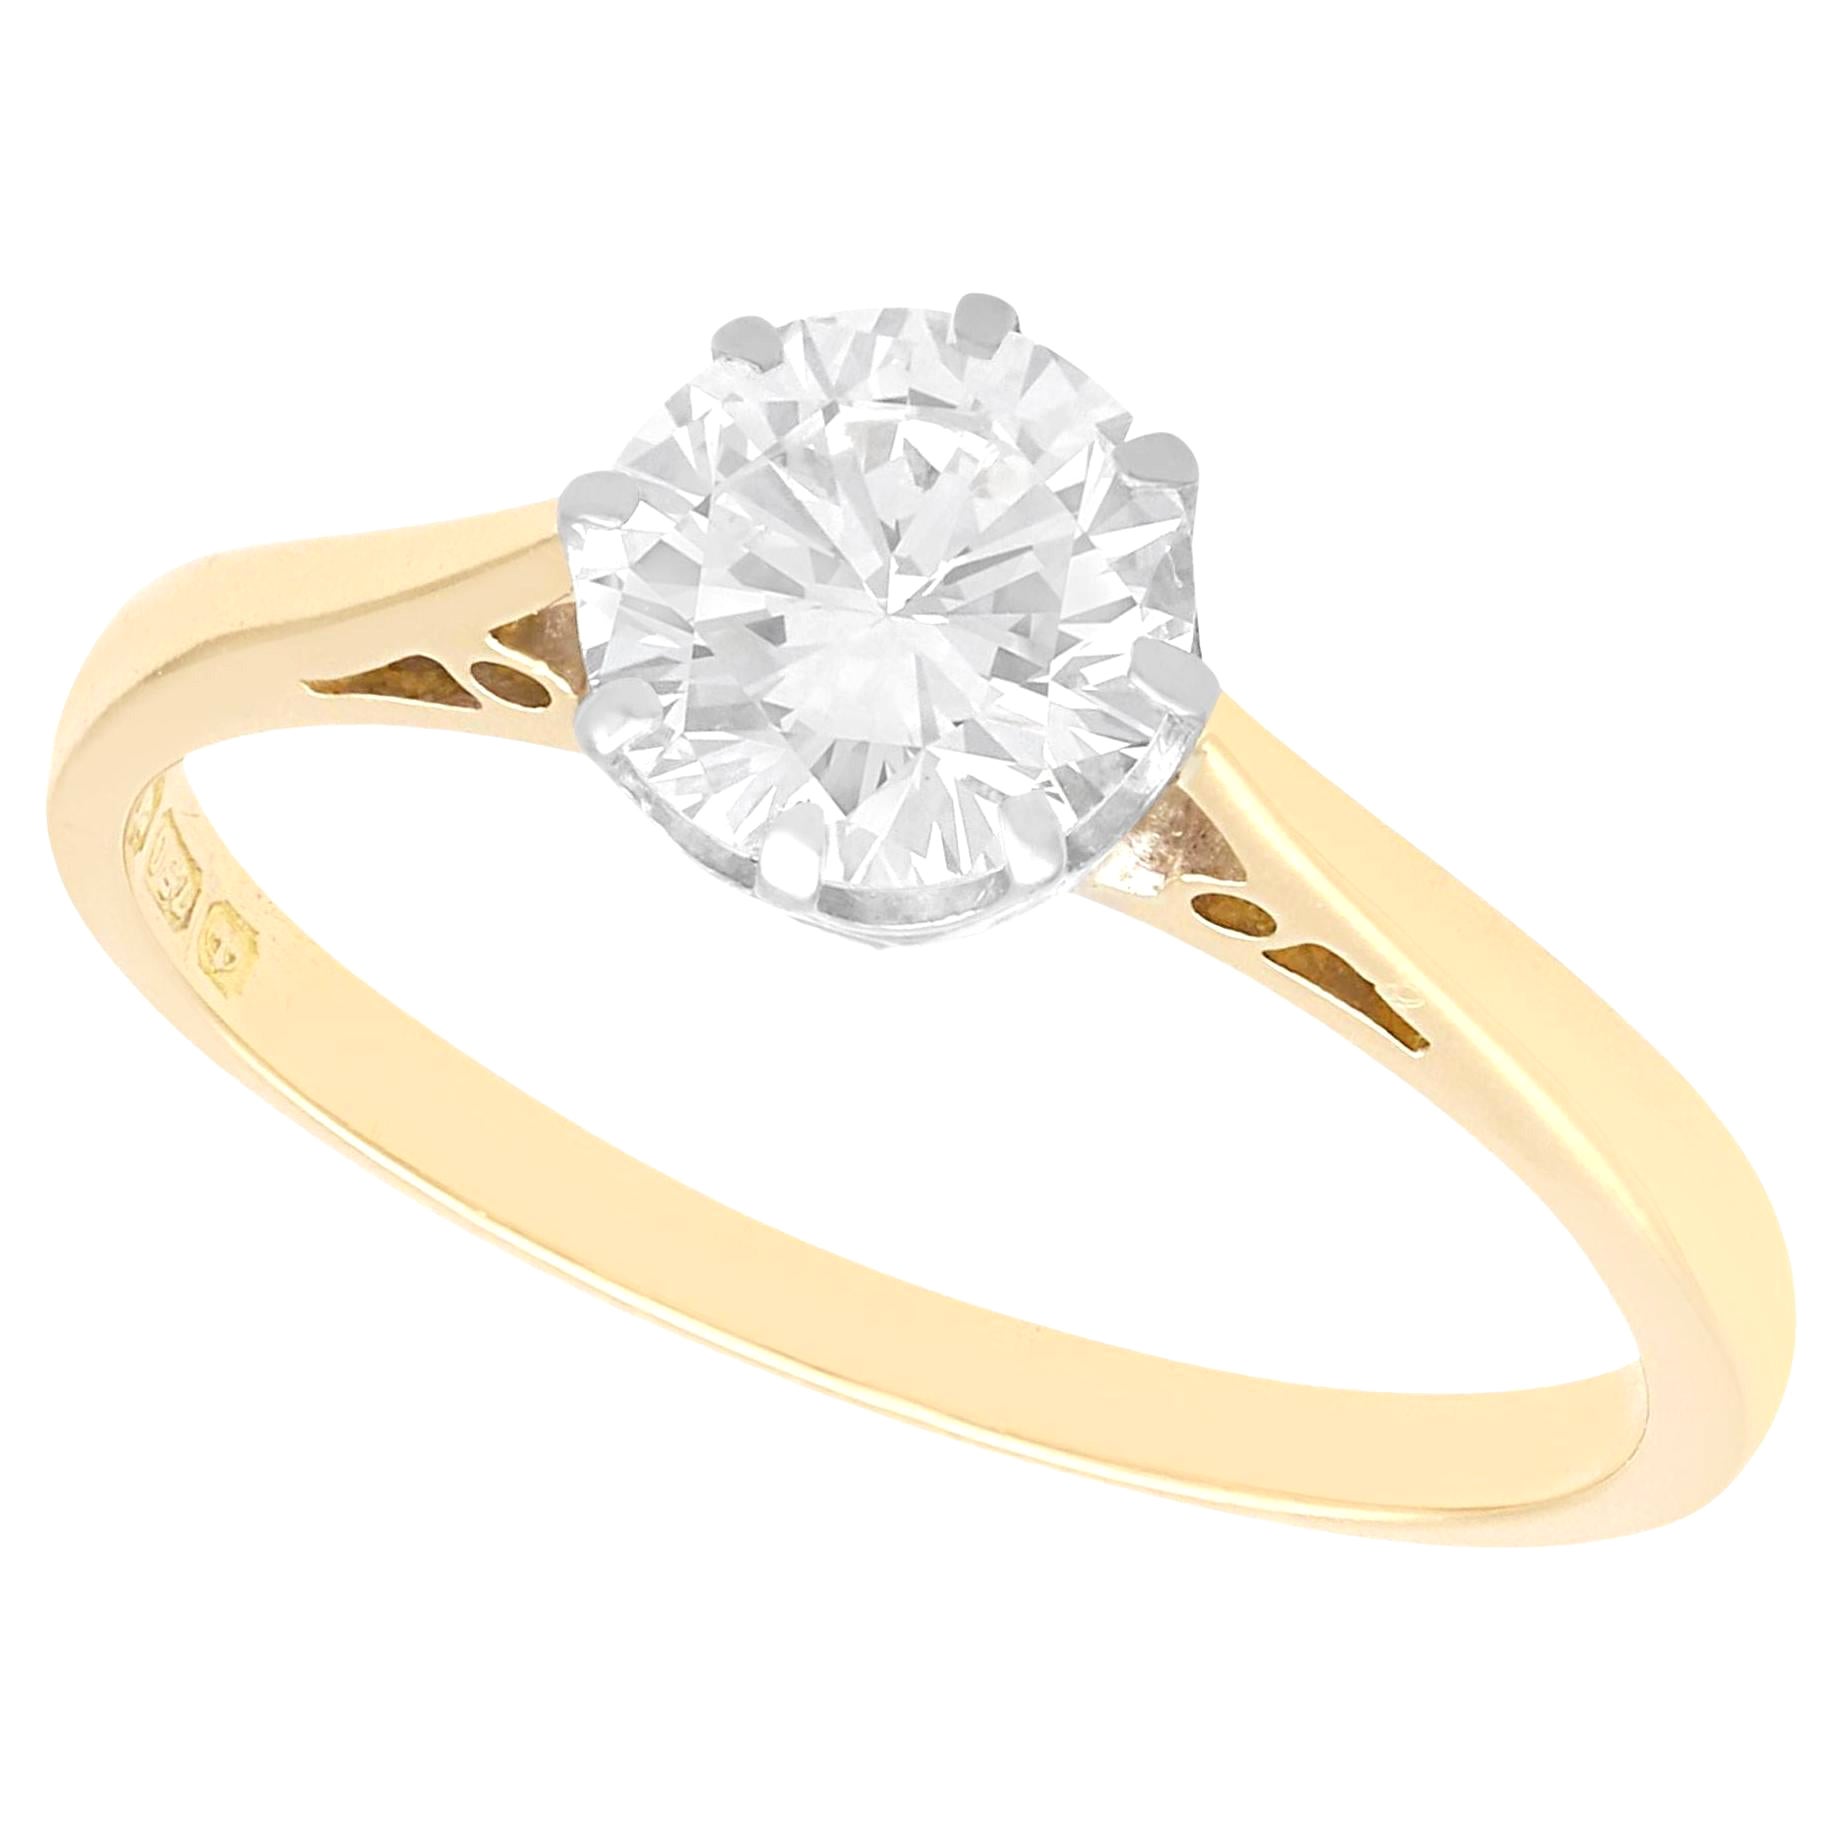 Vintage 1.12 Carat Diamond and Yellow Gold Solitaire Ring